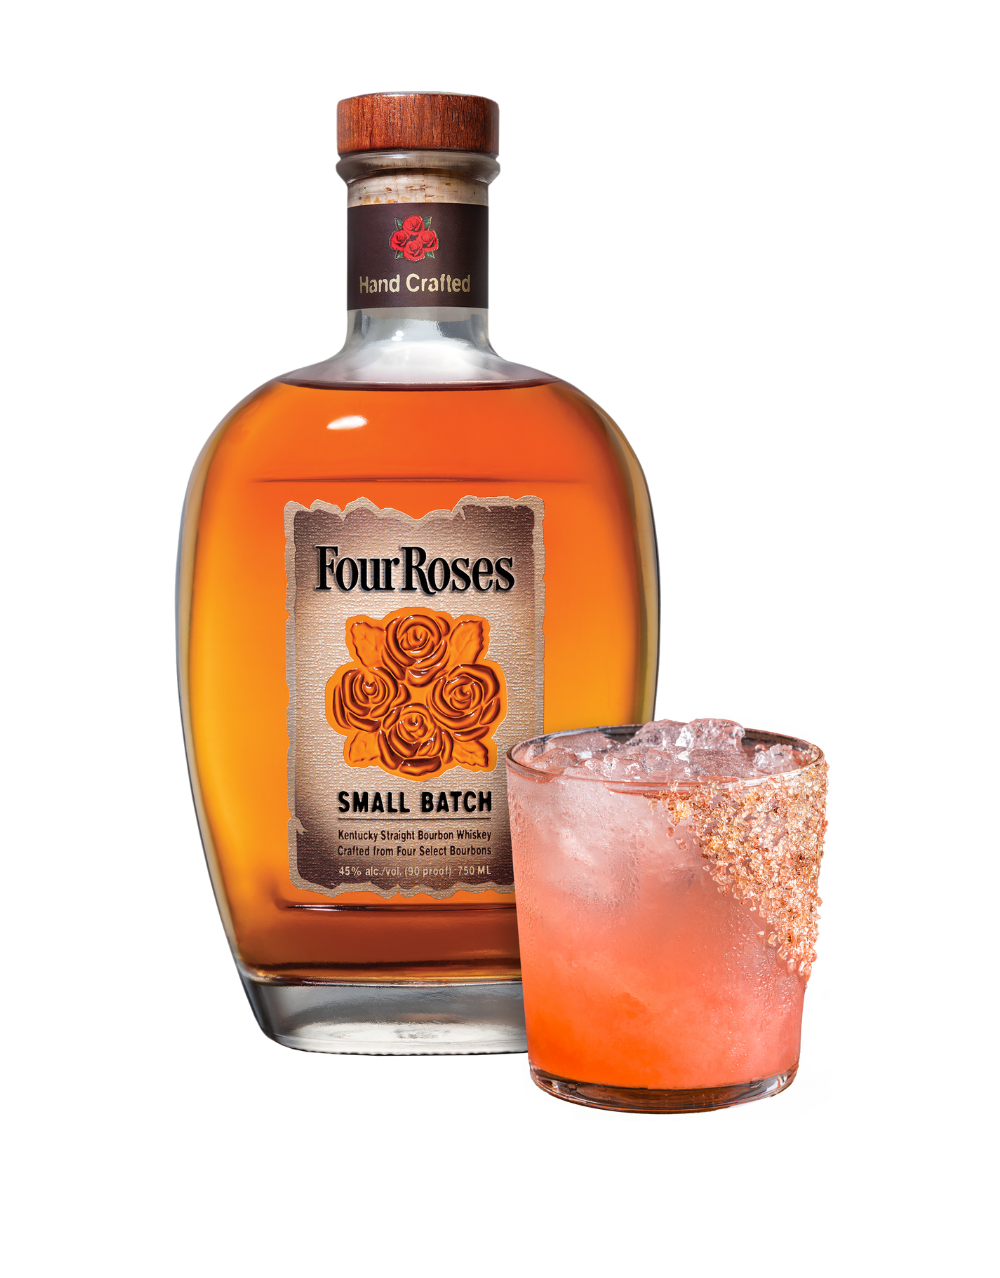 Four Roses Launches First-ever Co-branded Culinary Product: TOASTED VANILLA  BOURBON SALT